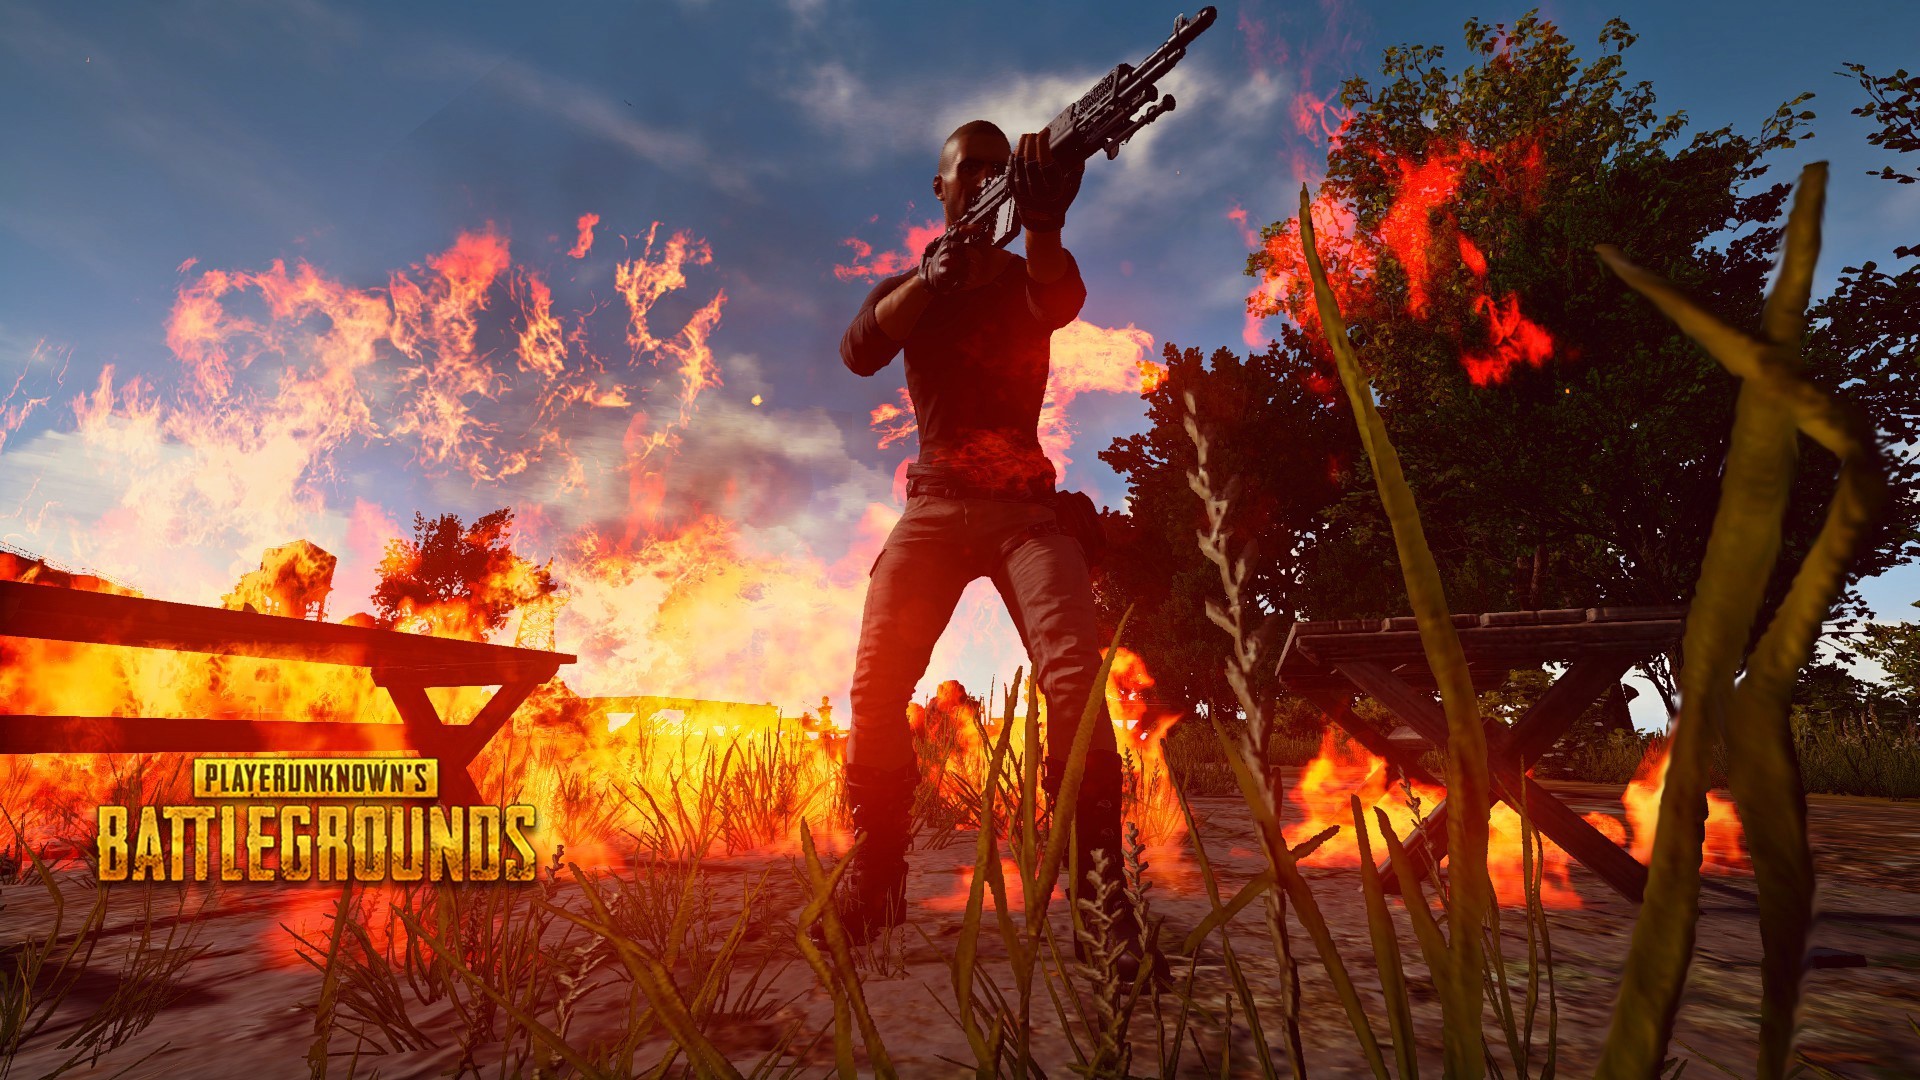 Free download Pubg Wallpaper On Pc Download Hack Pubg Mobile Pc 2019  [1920x1080] for your Desktop, Mobile & Tablet | Explore 48+ Wallpaper For Pc  | Wallpapers For Pc, Hd Wallpaper For